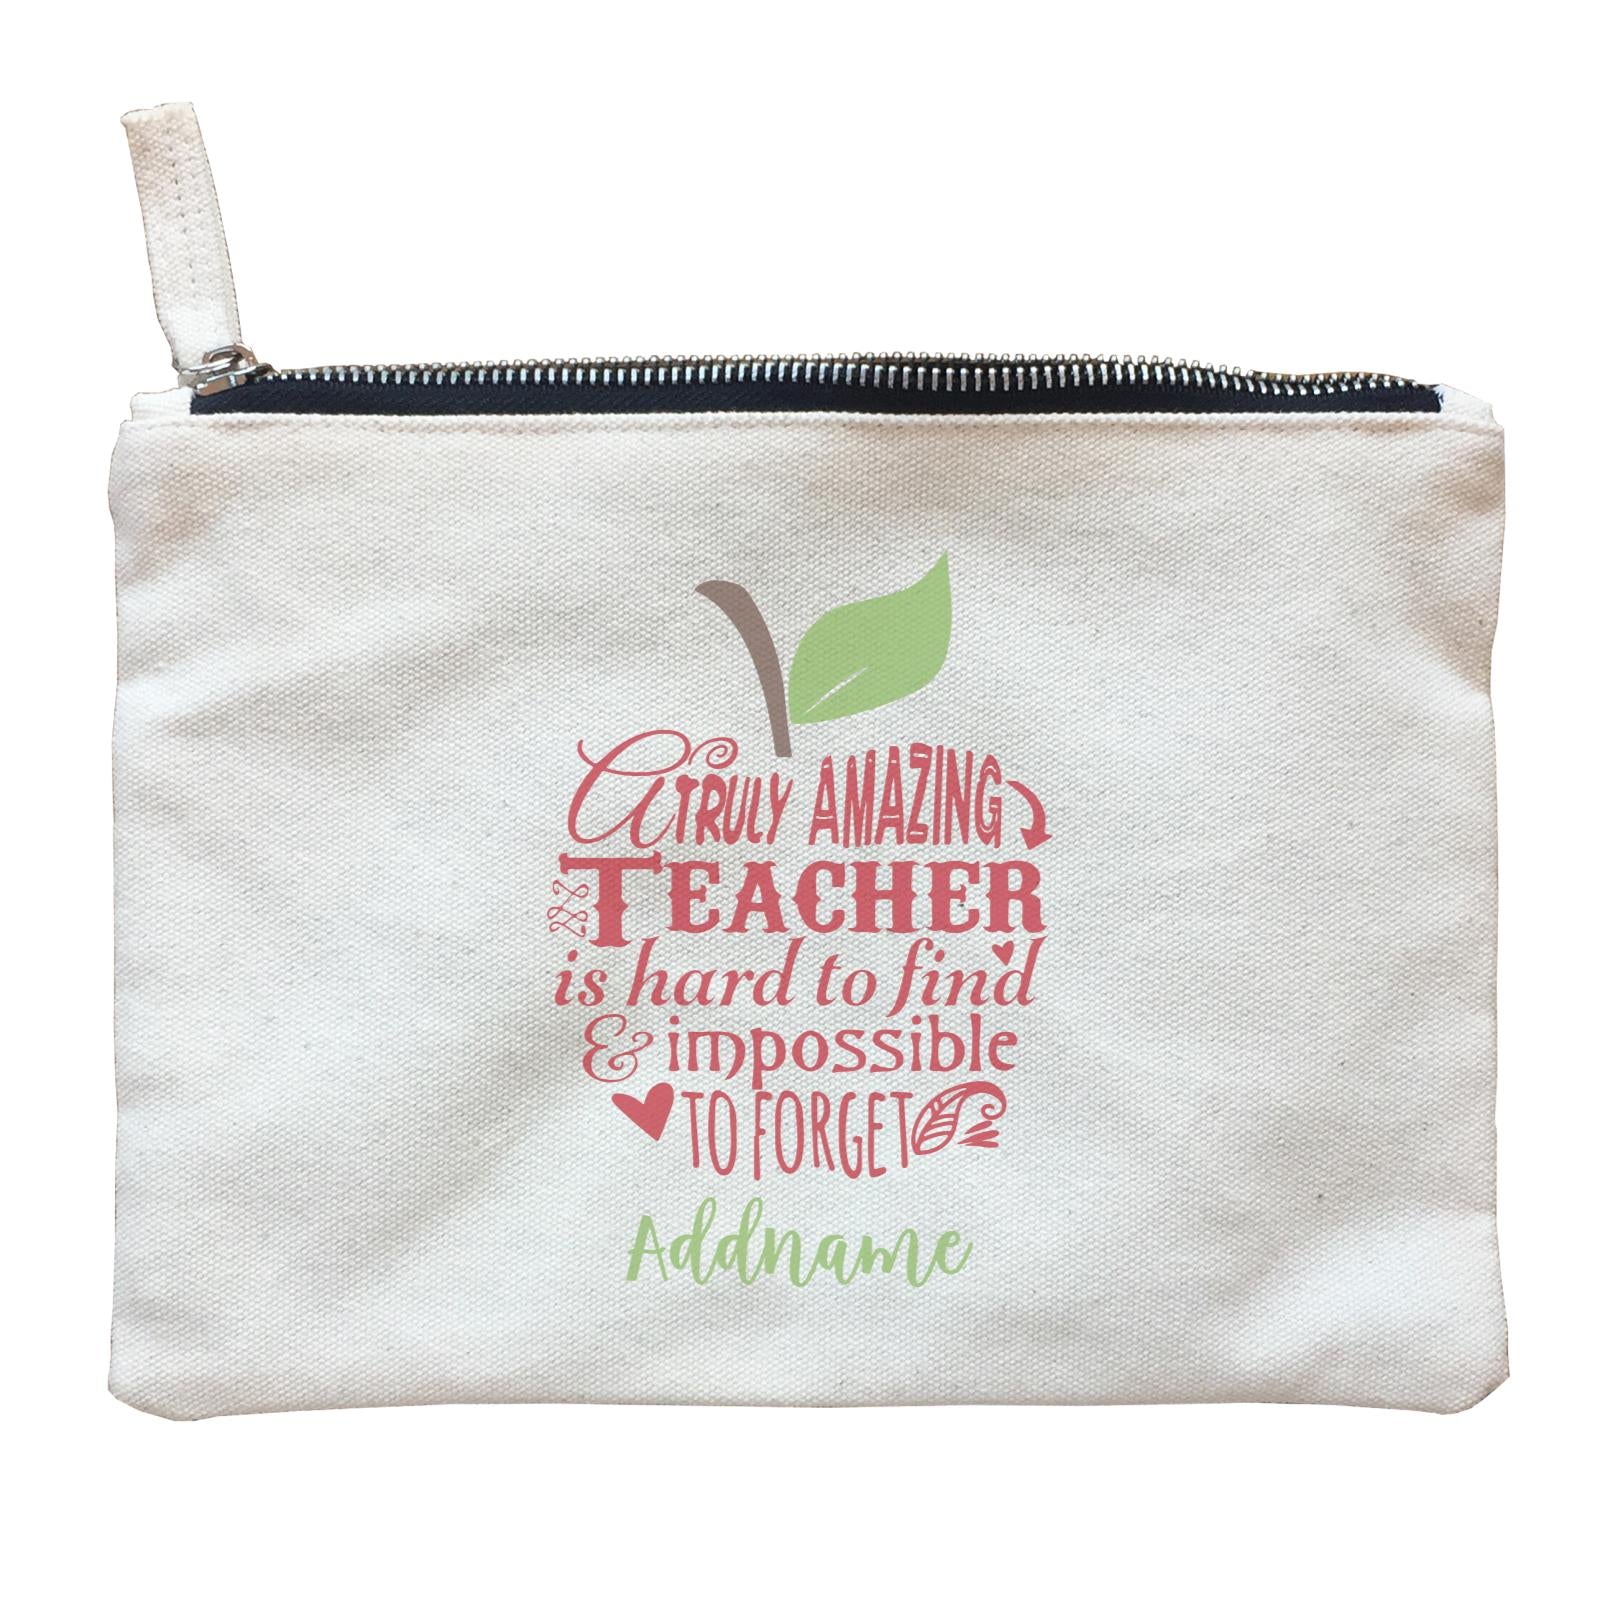 Teacher Apple Truly Amazing Teacher is Had To Find & Impossible To Forget Addname Zipper Pouch